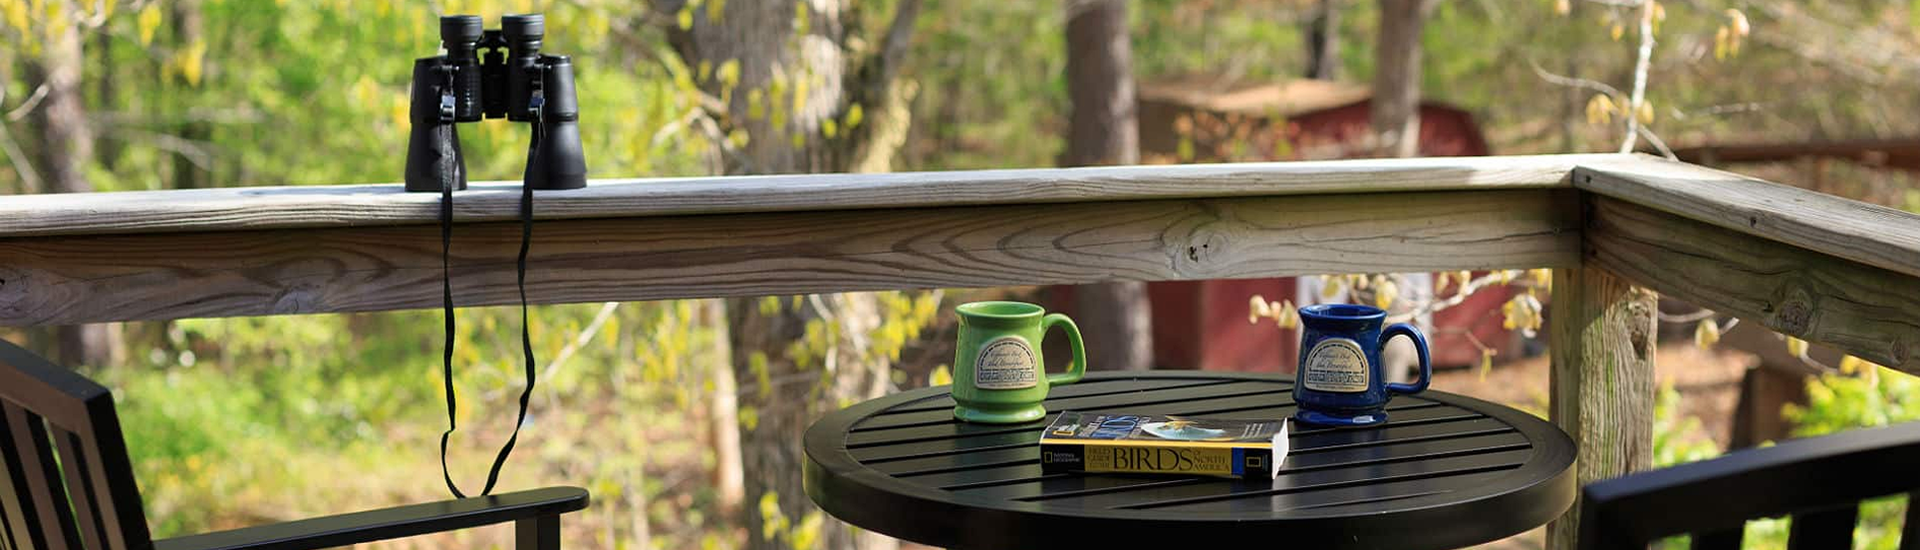 Black deck table with coffee cups and a book, next to the deck railing with binoculars